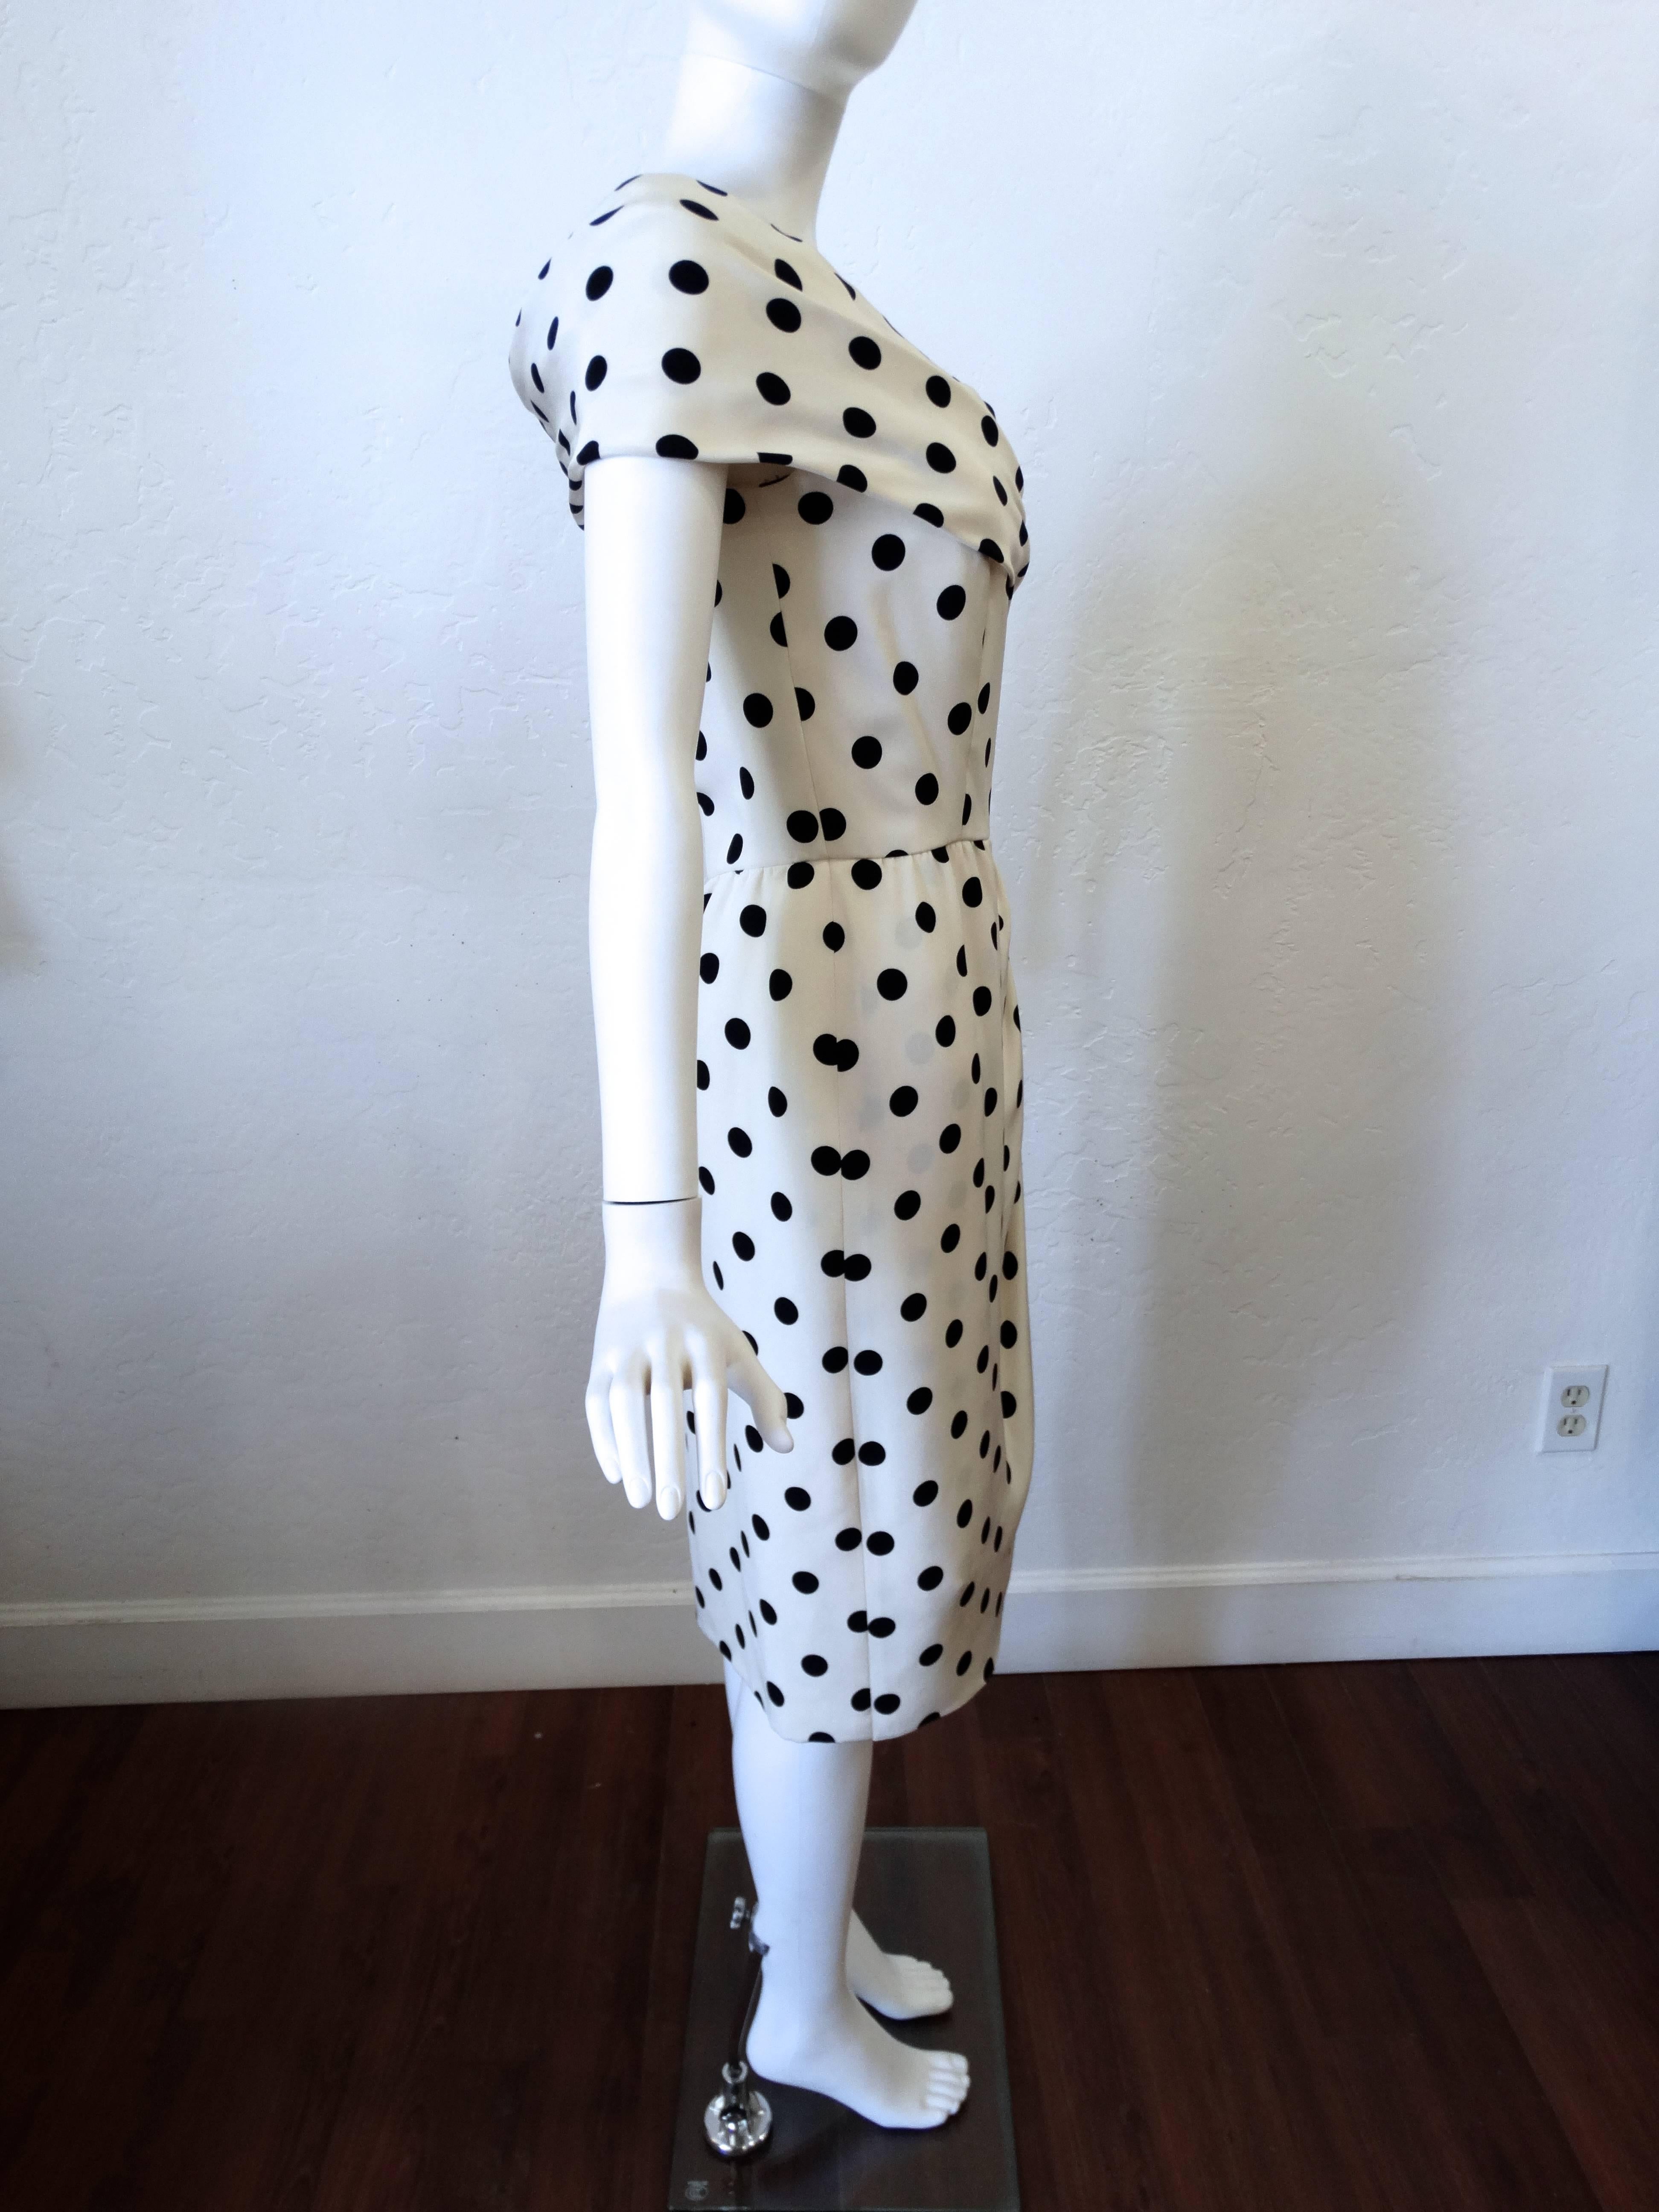 This is a gorgeous 1980's does 1950's Oscar de la Renta silk polka dot dress. Exquisitely constructed, the dress is fully lined with silk. The color is a winter white silk with black polka dots. Dress has a 1950's hourglass silhouette with a nipped